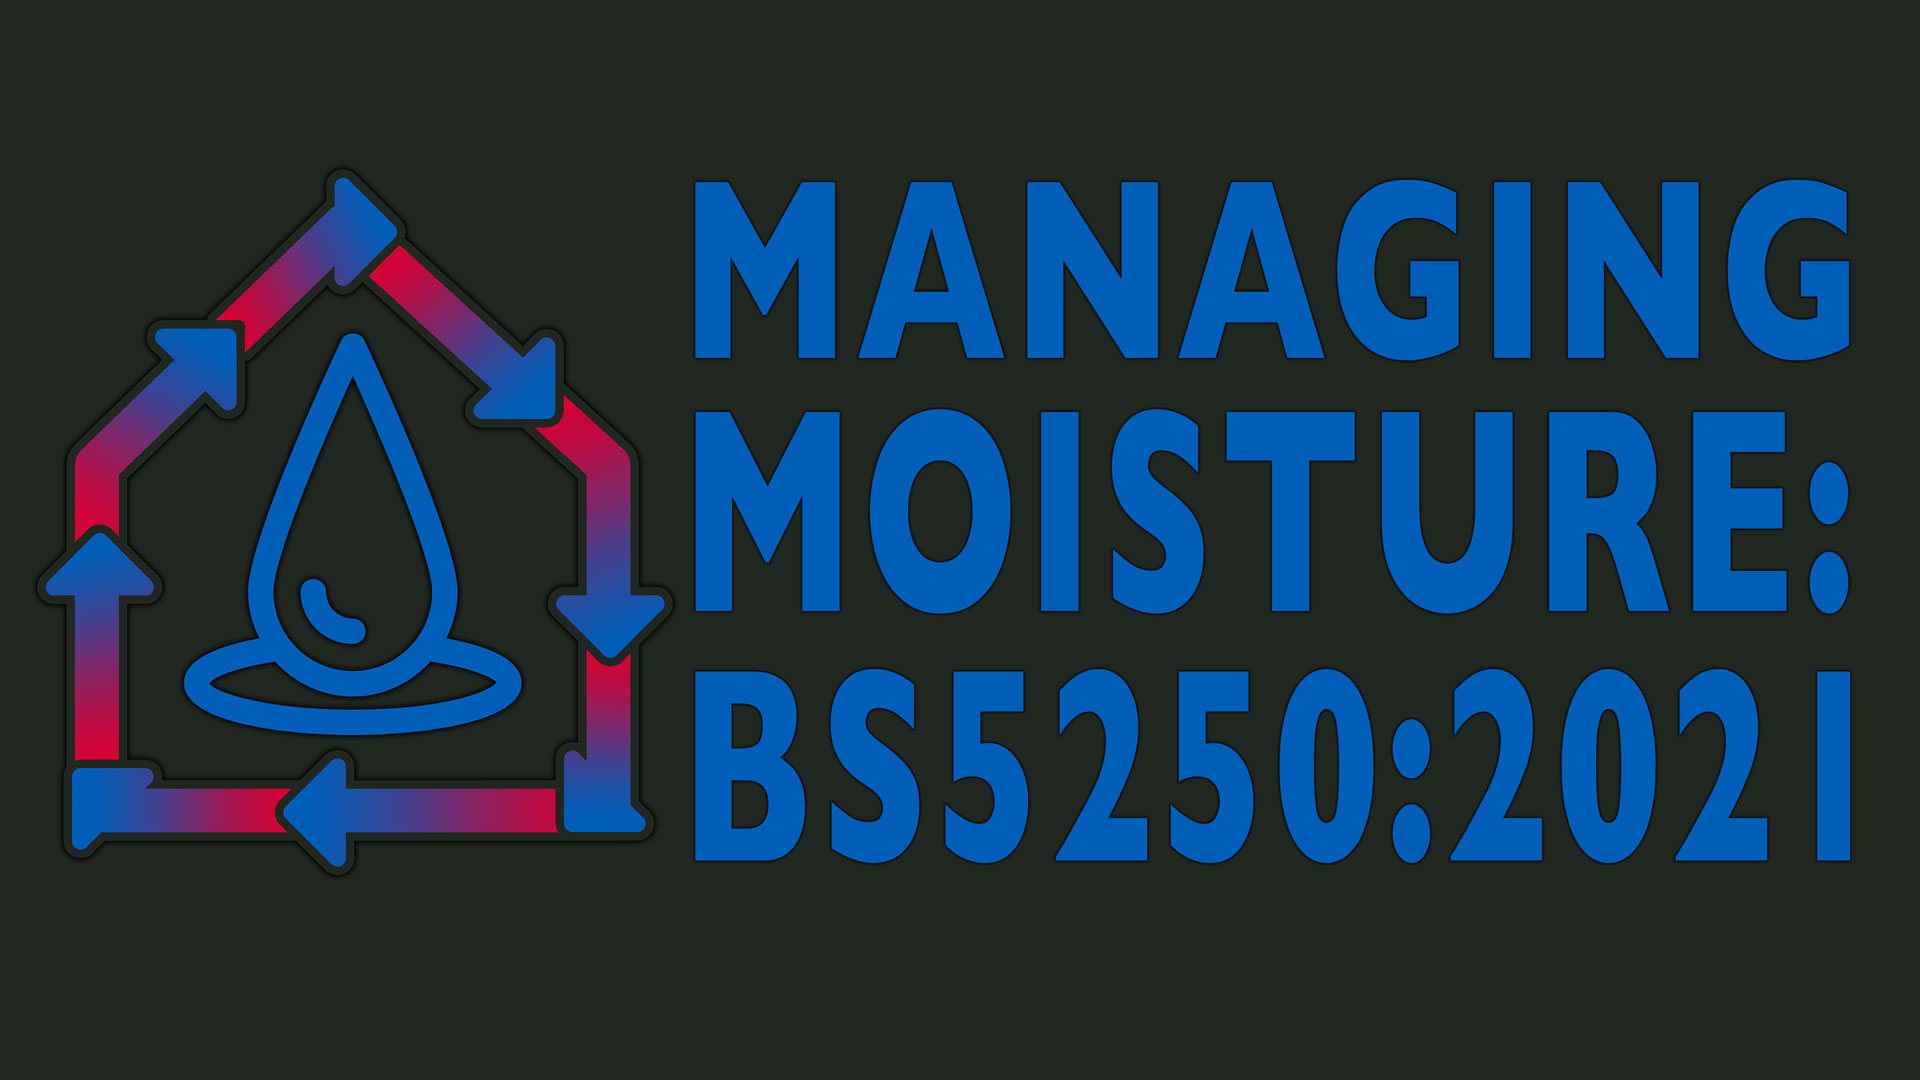 Welcome to our 30-minute webinar, "Managing Moisture: BS5250:2021". This event features a special guest presentation from Chris Sanders of Glenfeulan Consulting, former chairman of the BSI BS5250 committee.